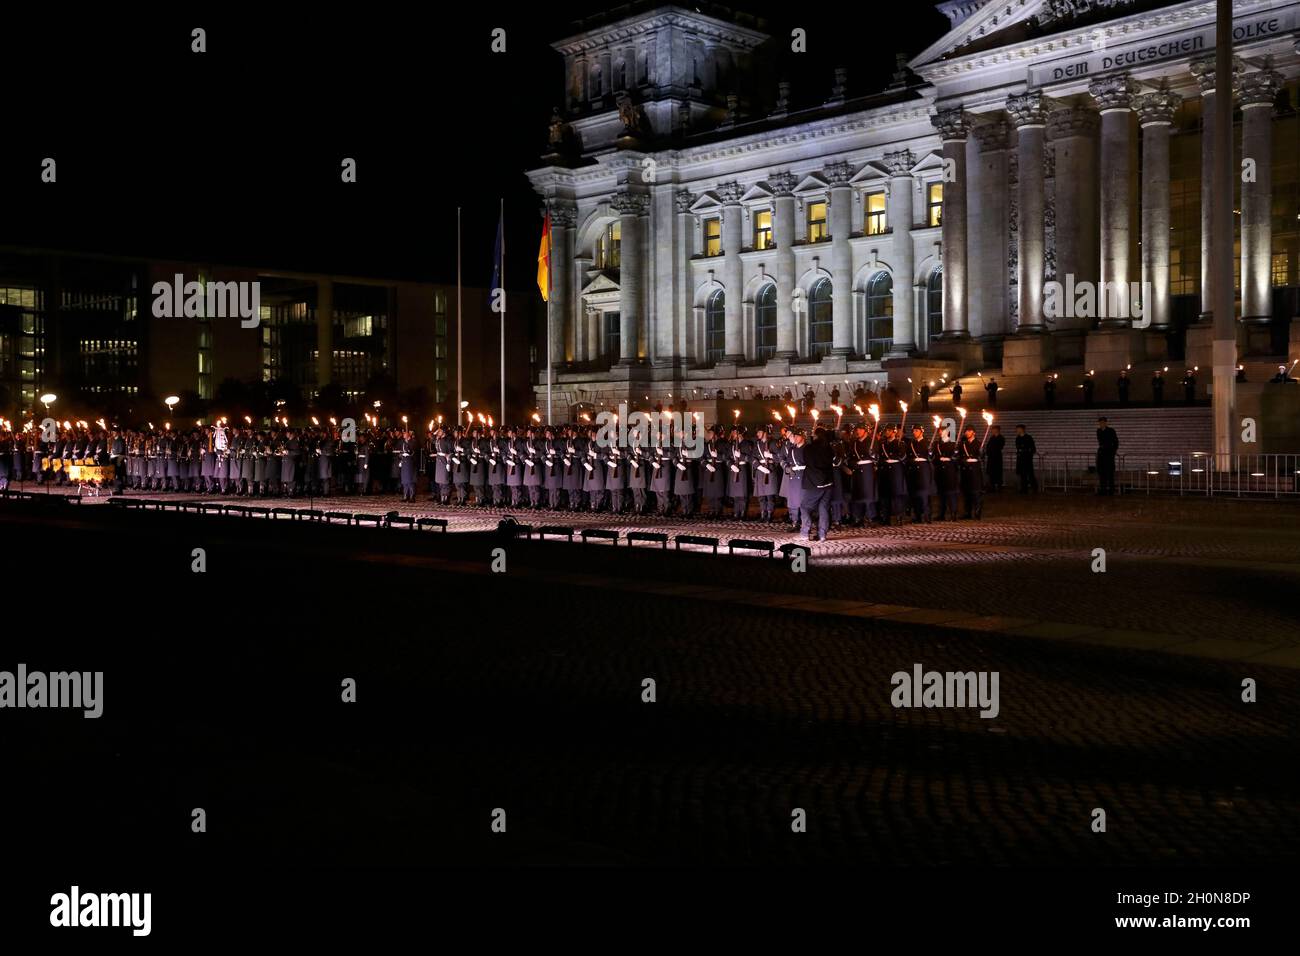 Berlin, Germany, 13th Oct, 2021.After almost twenty years, the Bundeswehr's mission in Afghanistan has finally come to an end as of August 27, 2021. The appreciation of the mission culminates with a Great Taps ceremony in front of the Reichstag in Berlin. The Great Taps is a solemn military ceremony held in the evening, performed by a special formation of military musicians, gunmen and torchbearers designated only for this purpose. Credit: Juergen Nowak / Alamy Live News. Stock Photo